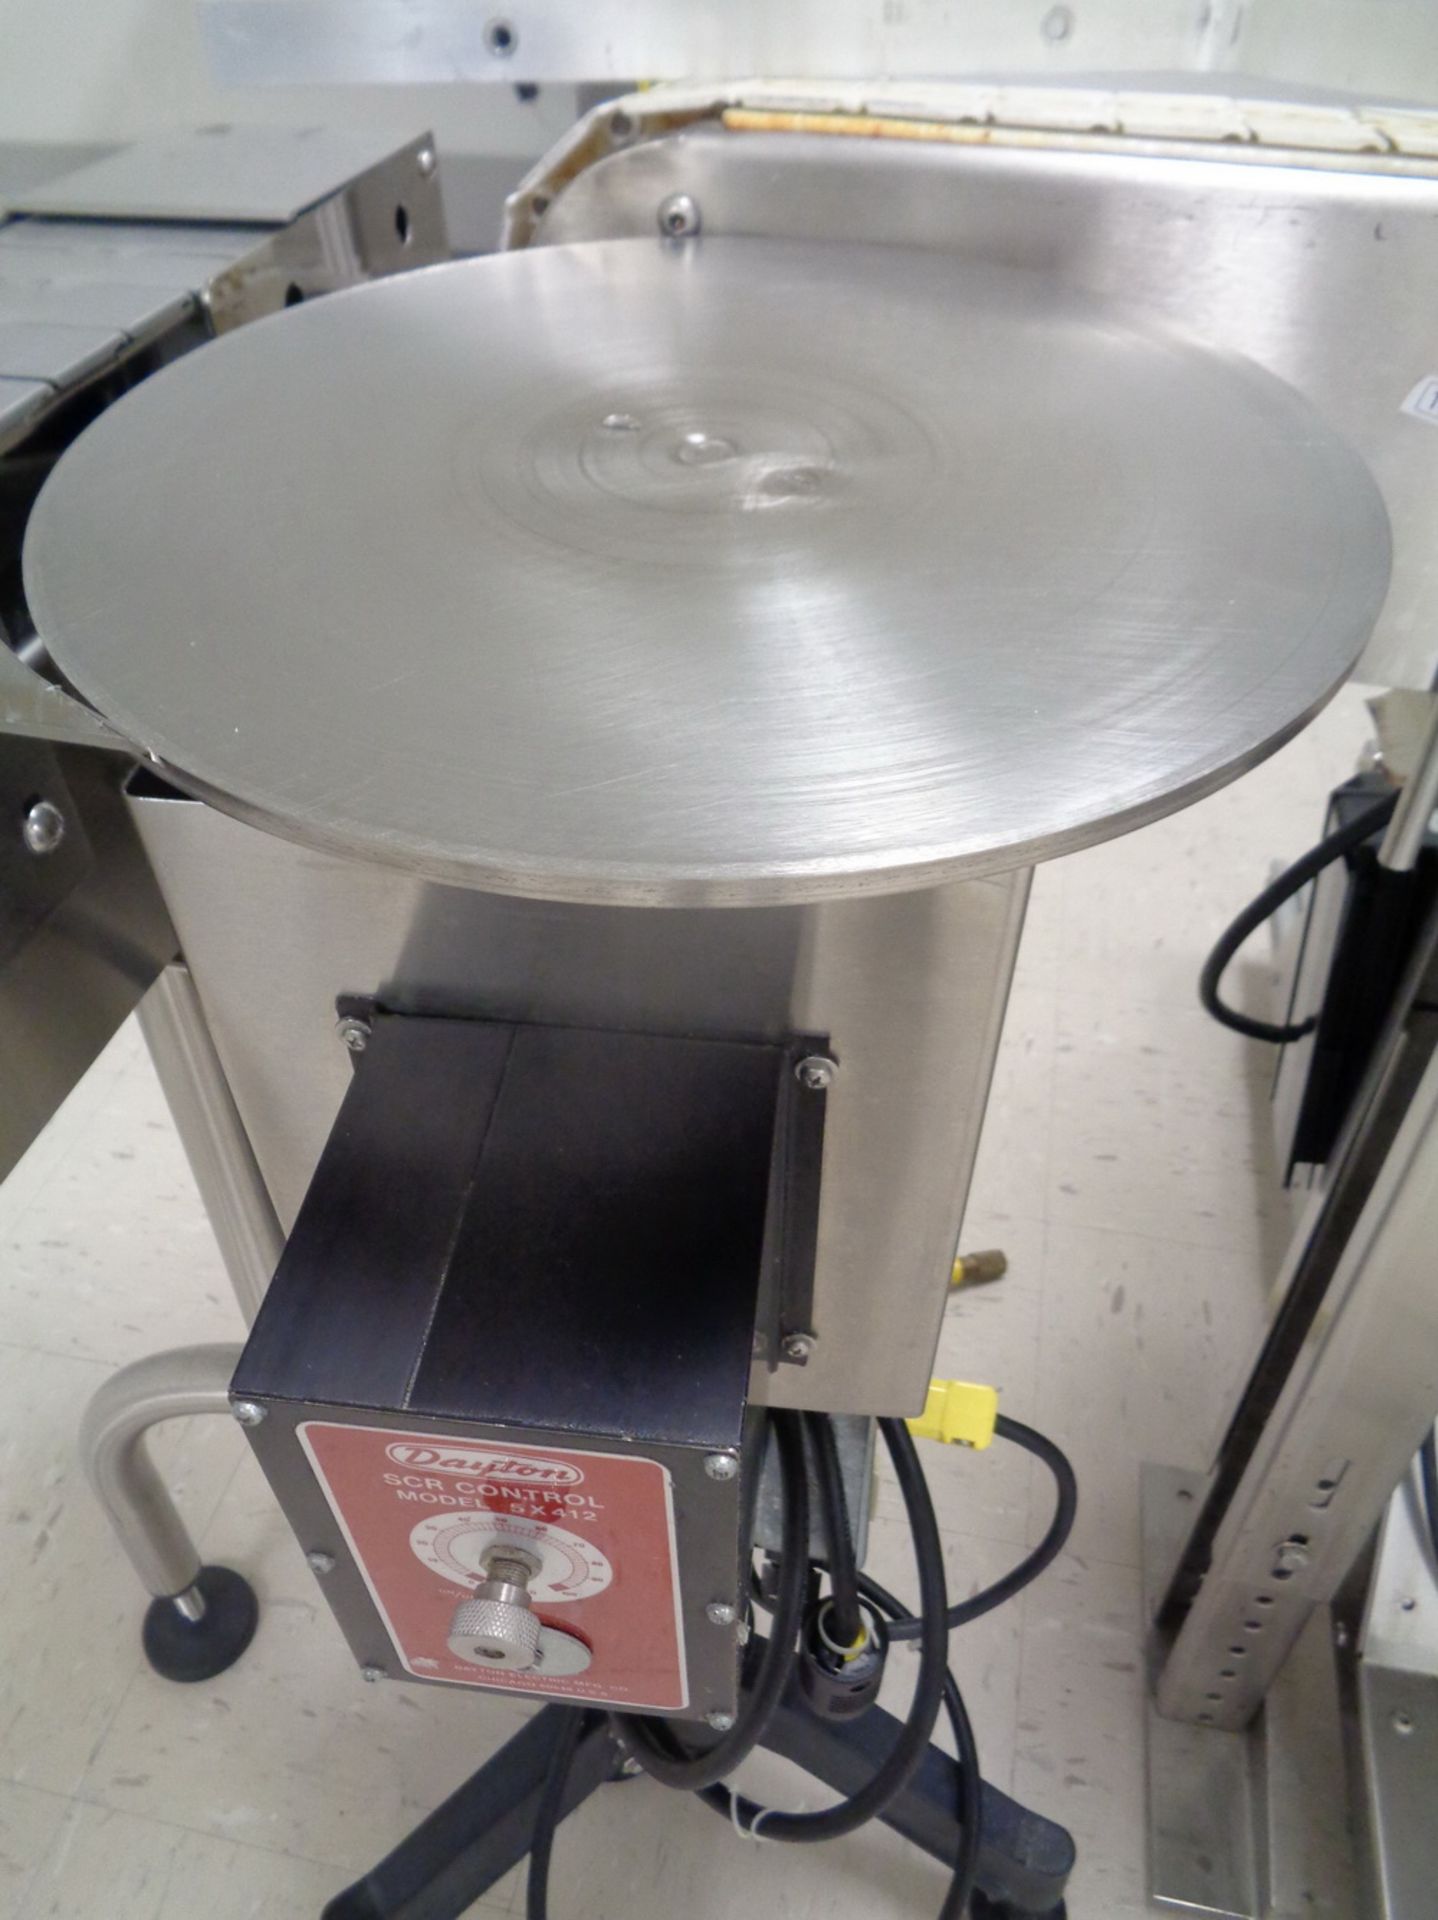 12” DIAMETER TRANSFER DISK (FOR 90 DEGREE DIRECTION CHANGE) SEE AUCTIONEER NOTE: - Image 2 of 3